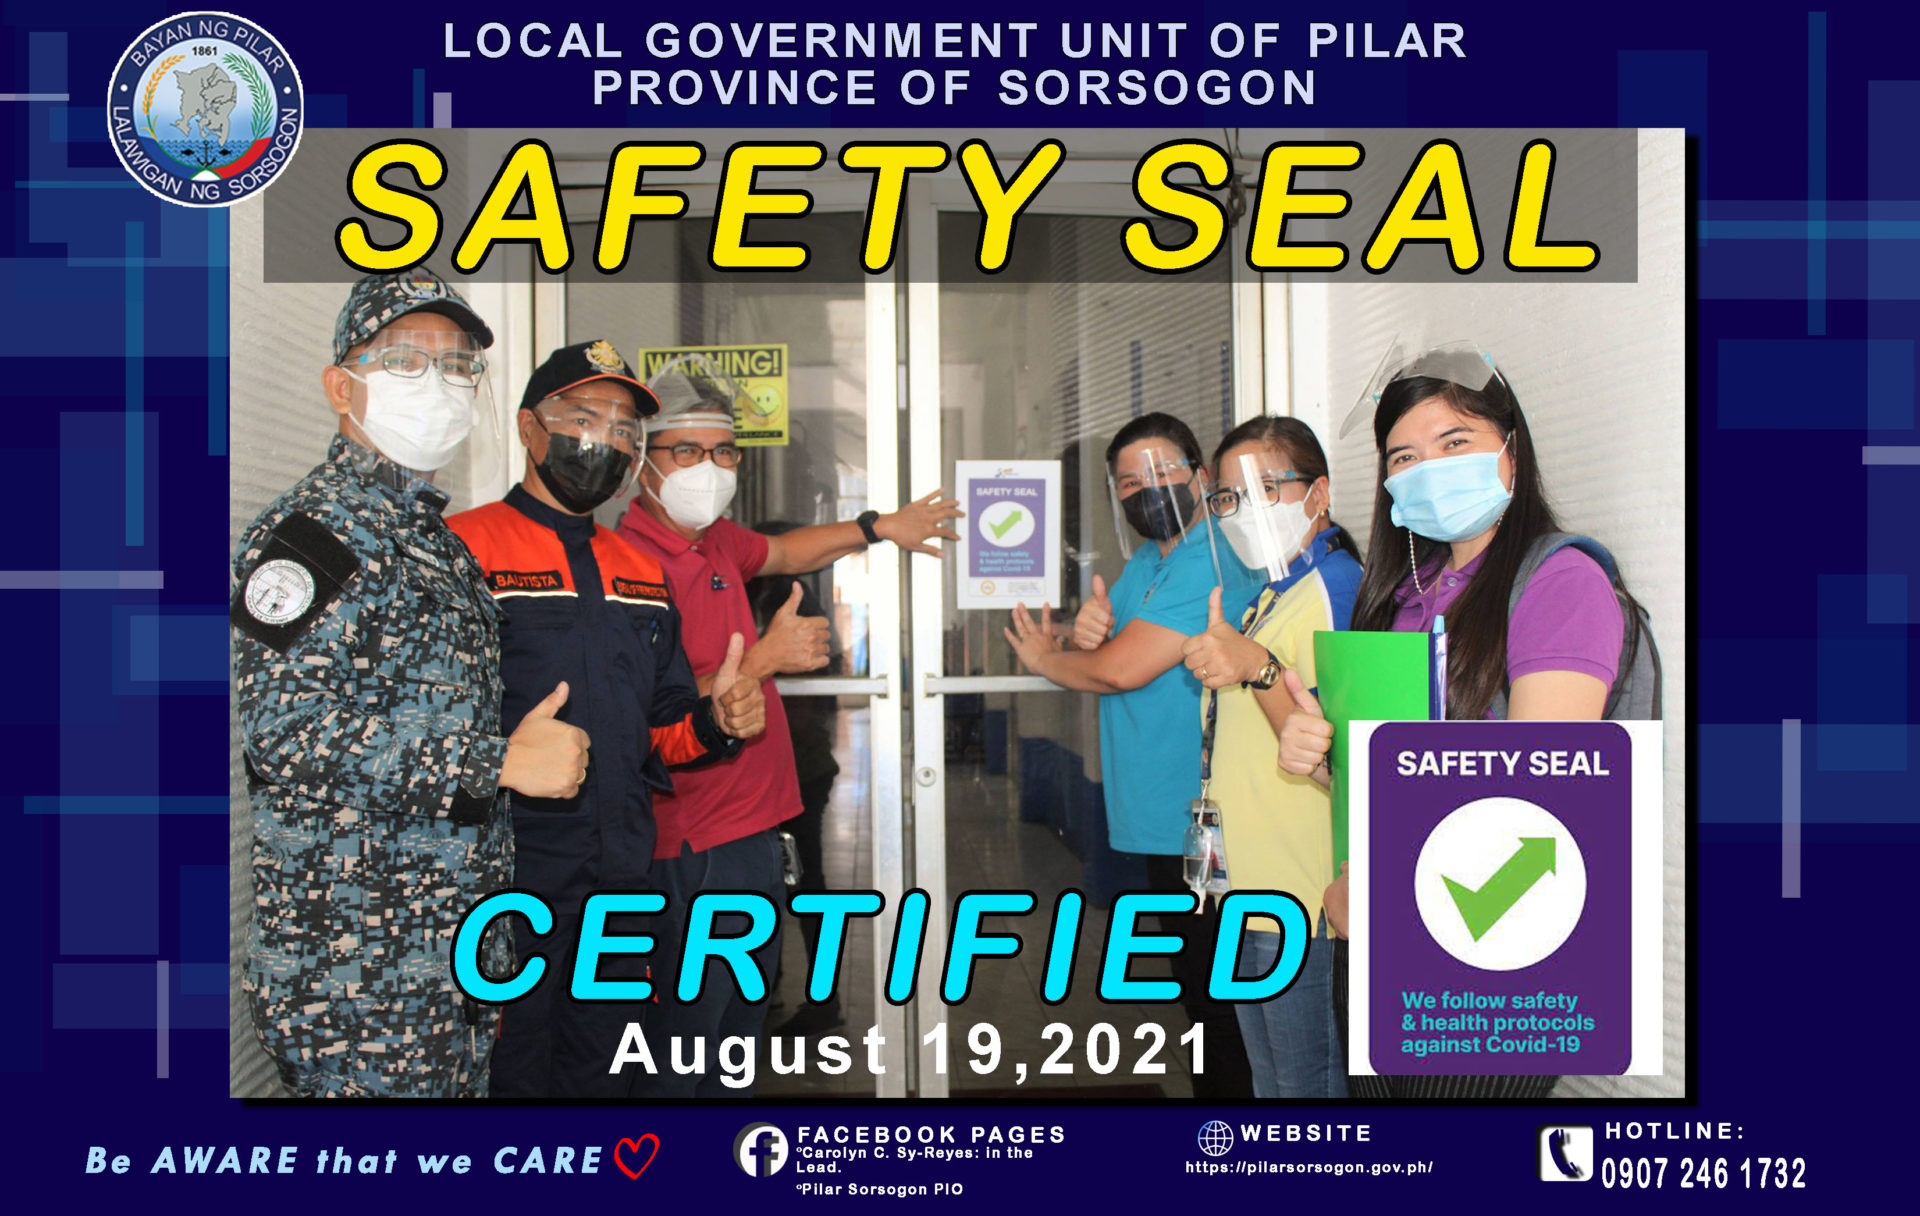 LGU PILAR successfully PASSED the Eligibility and Certification Process